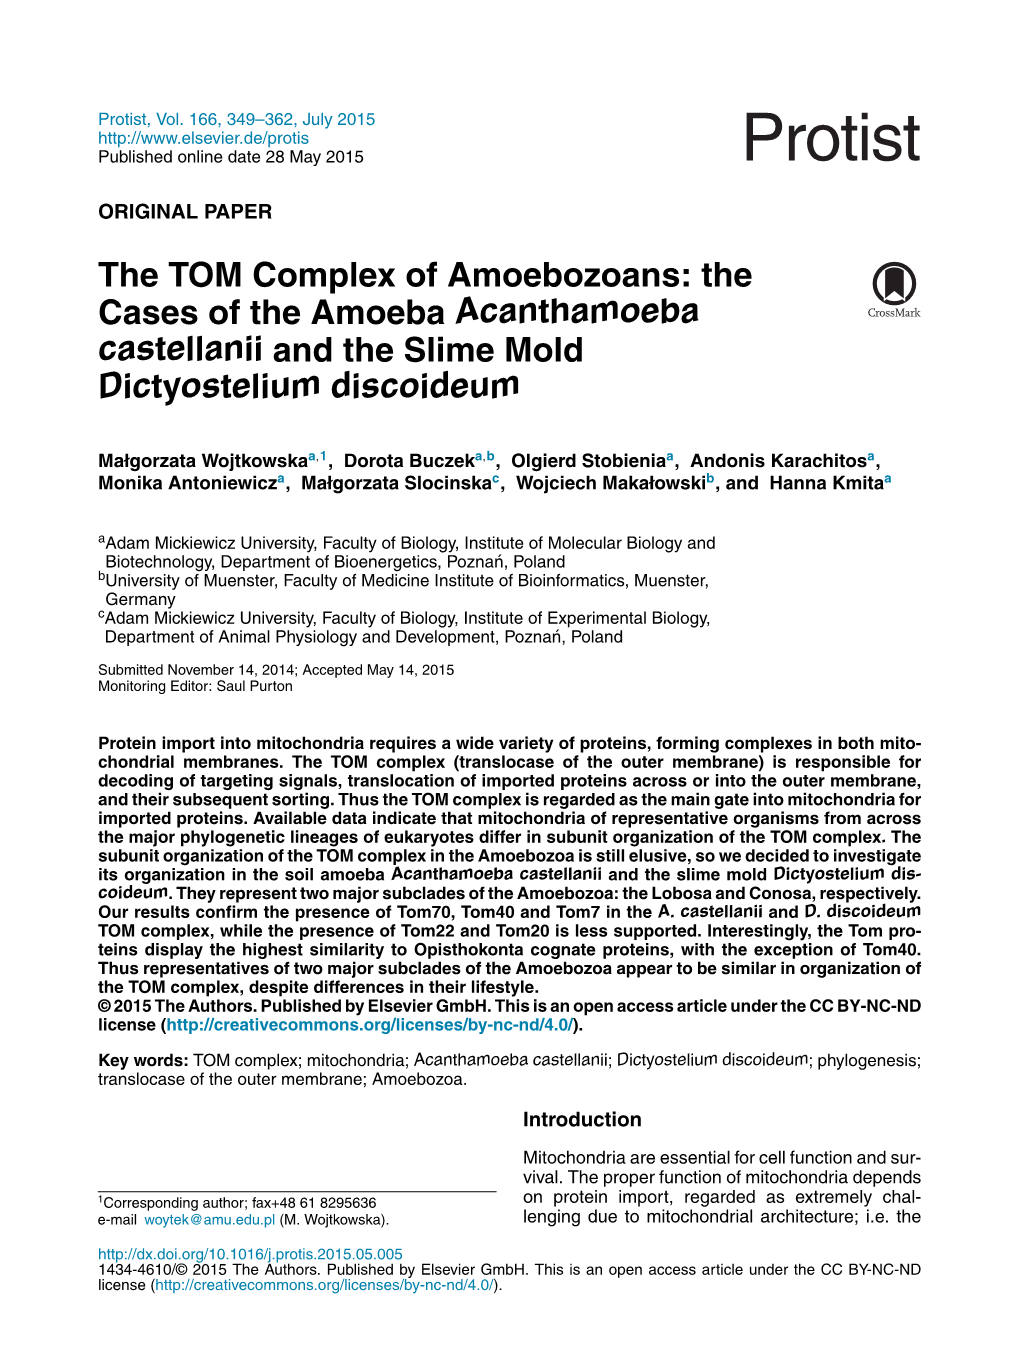 The TOM Complex of Amoebozoans: the Cases of the Amoeba